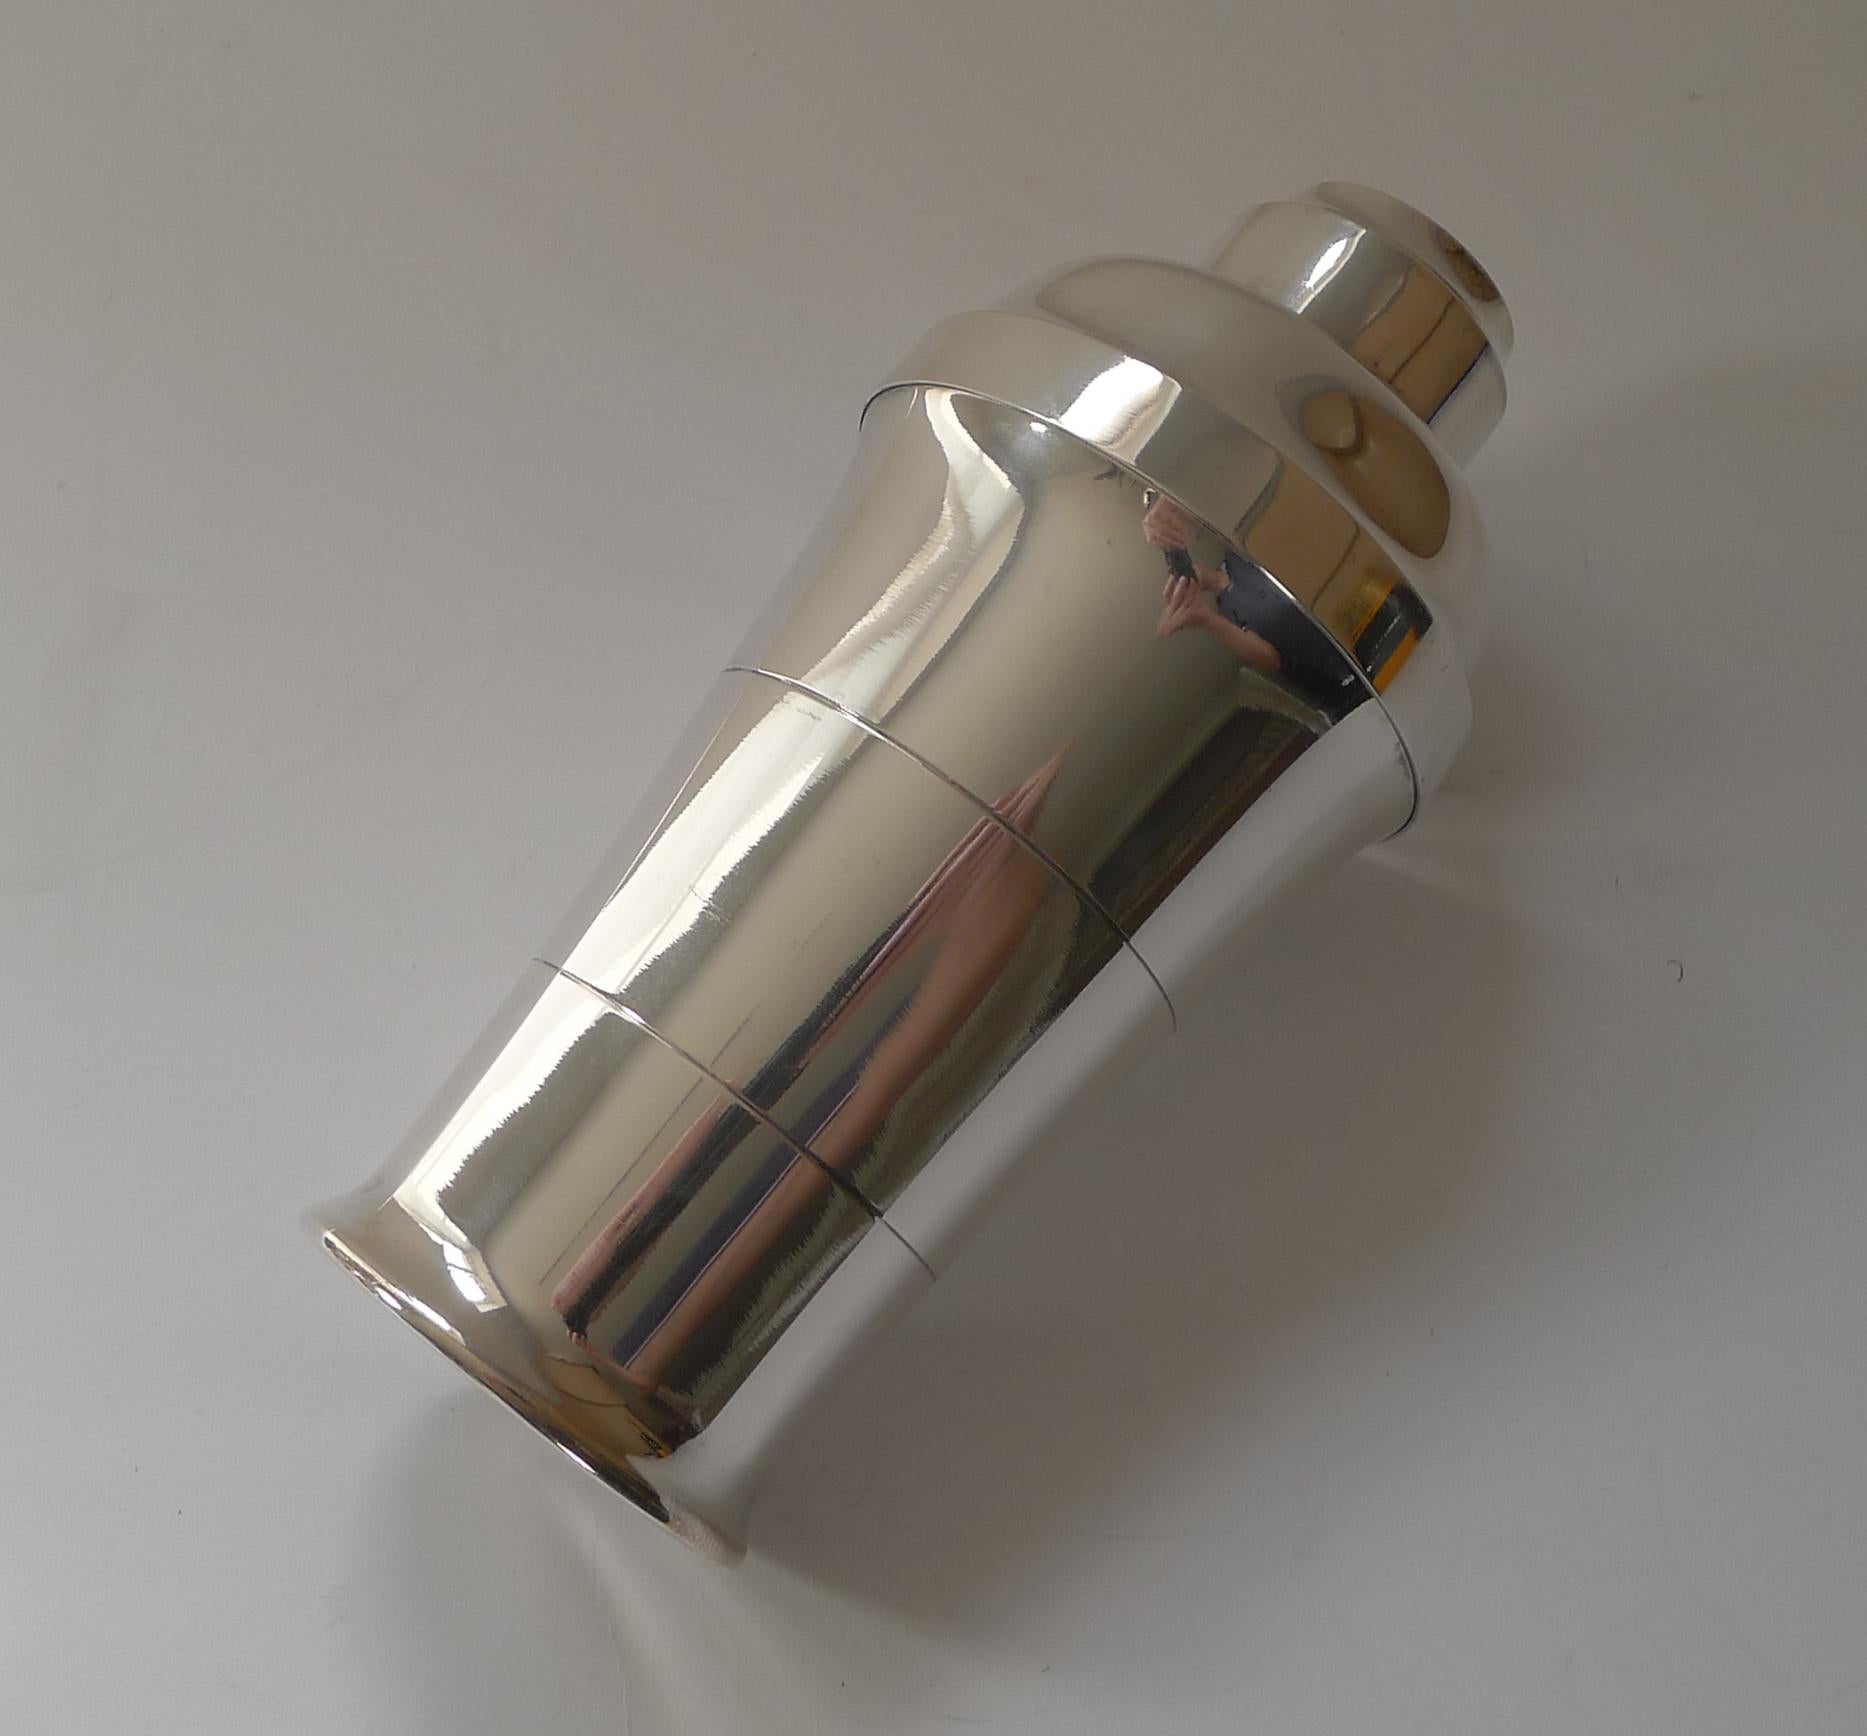 Mid-20th Century French Art Deco Silver Plated Cocktail Shaker c.1930 by St Medard, Paris